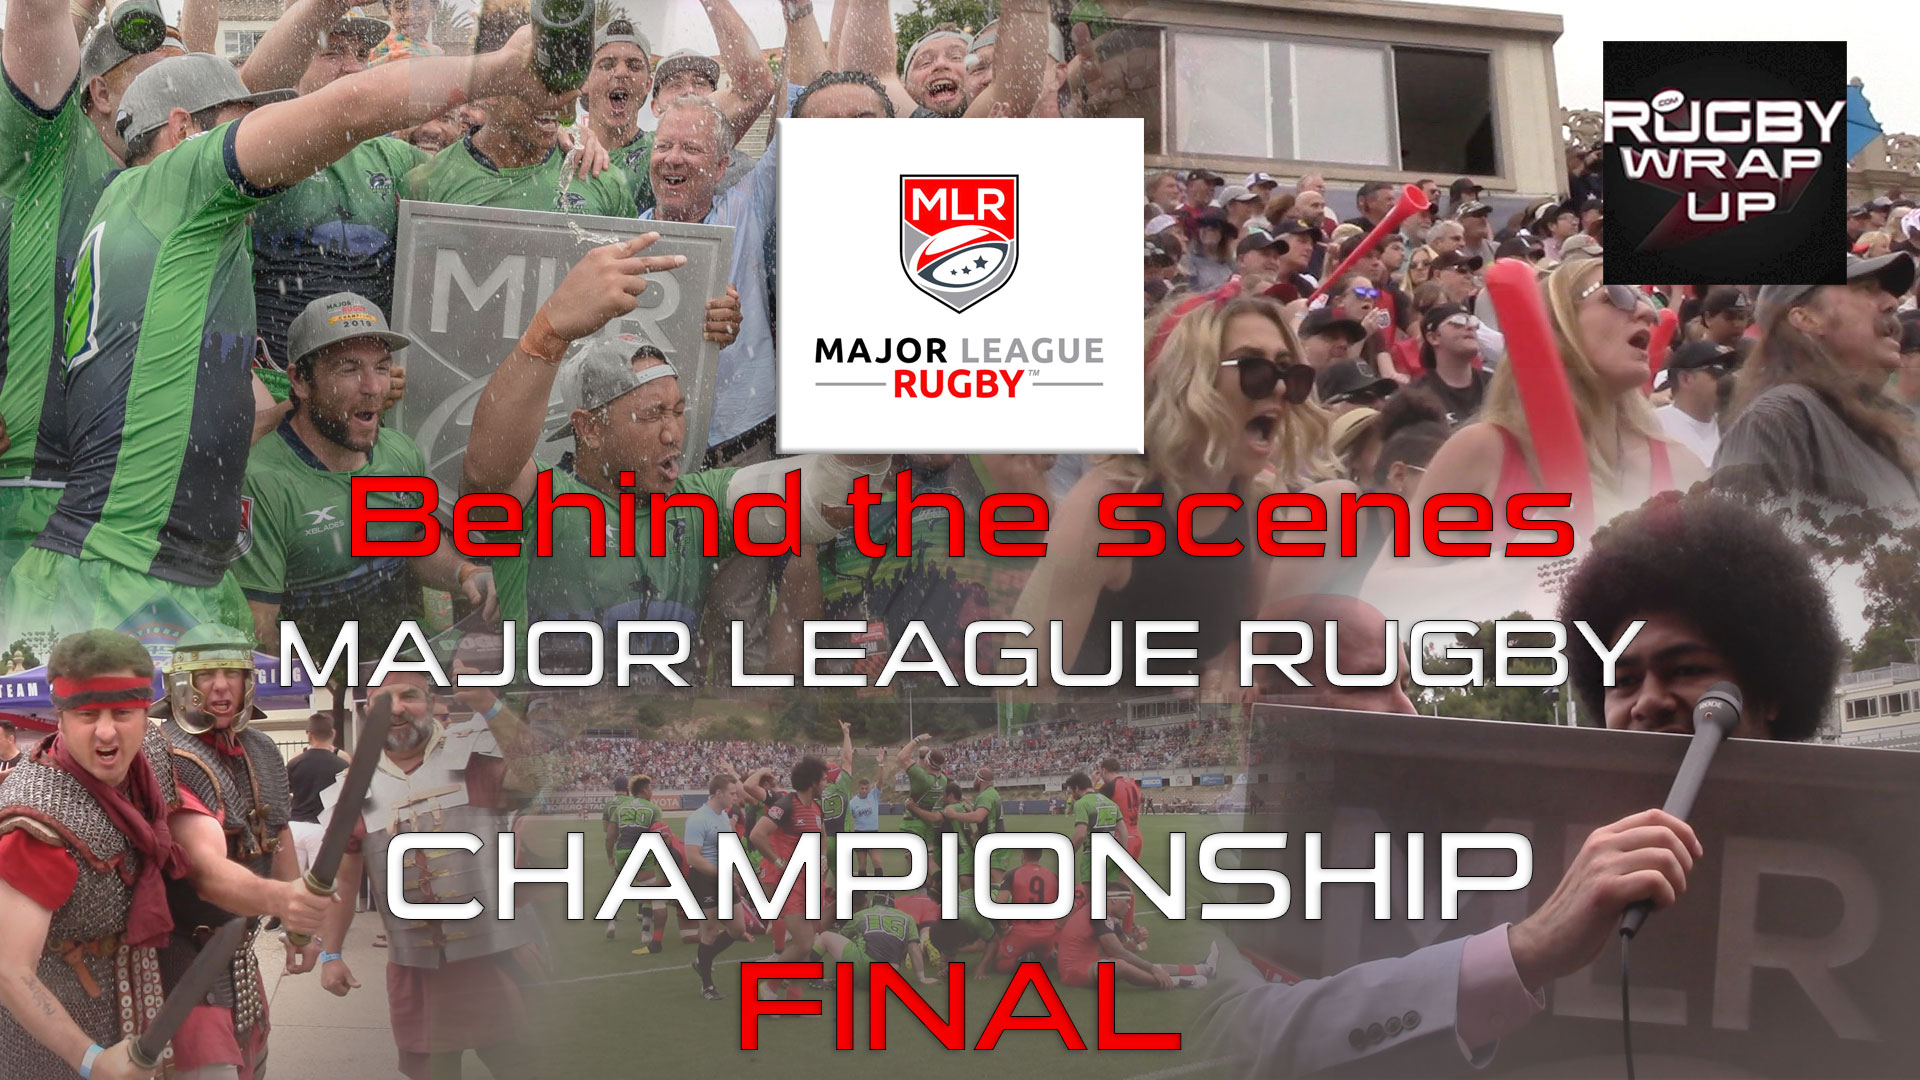 #MLR, Rugby_Wrap_Up